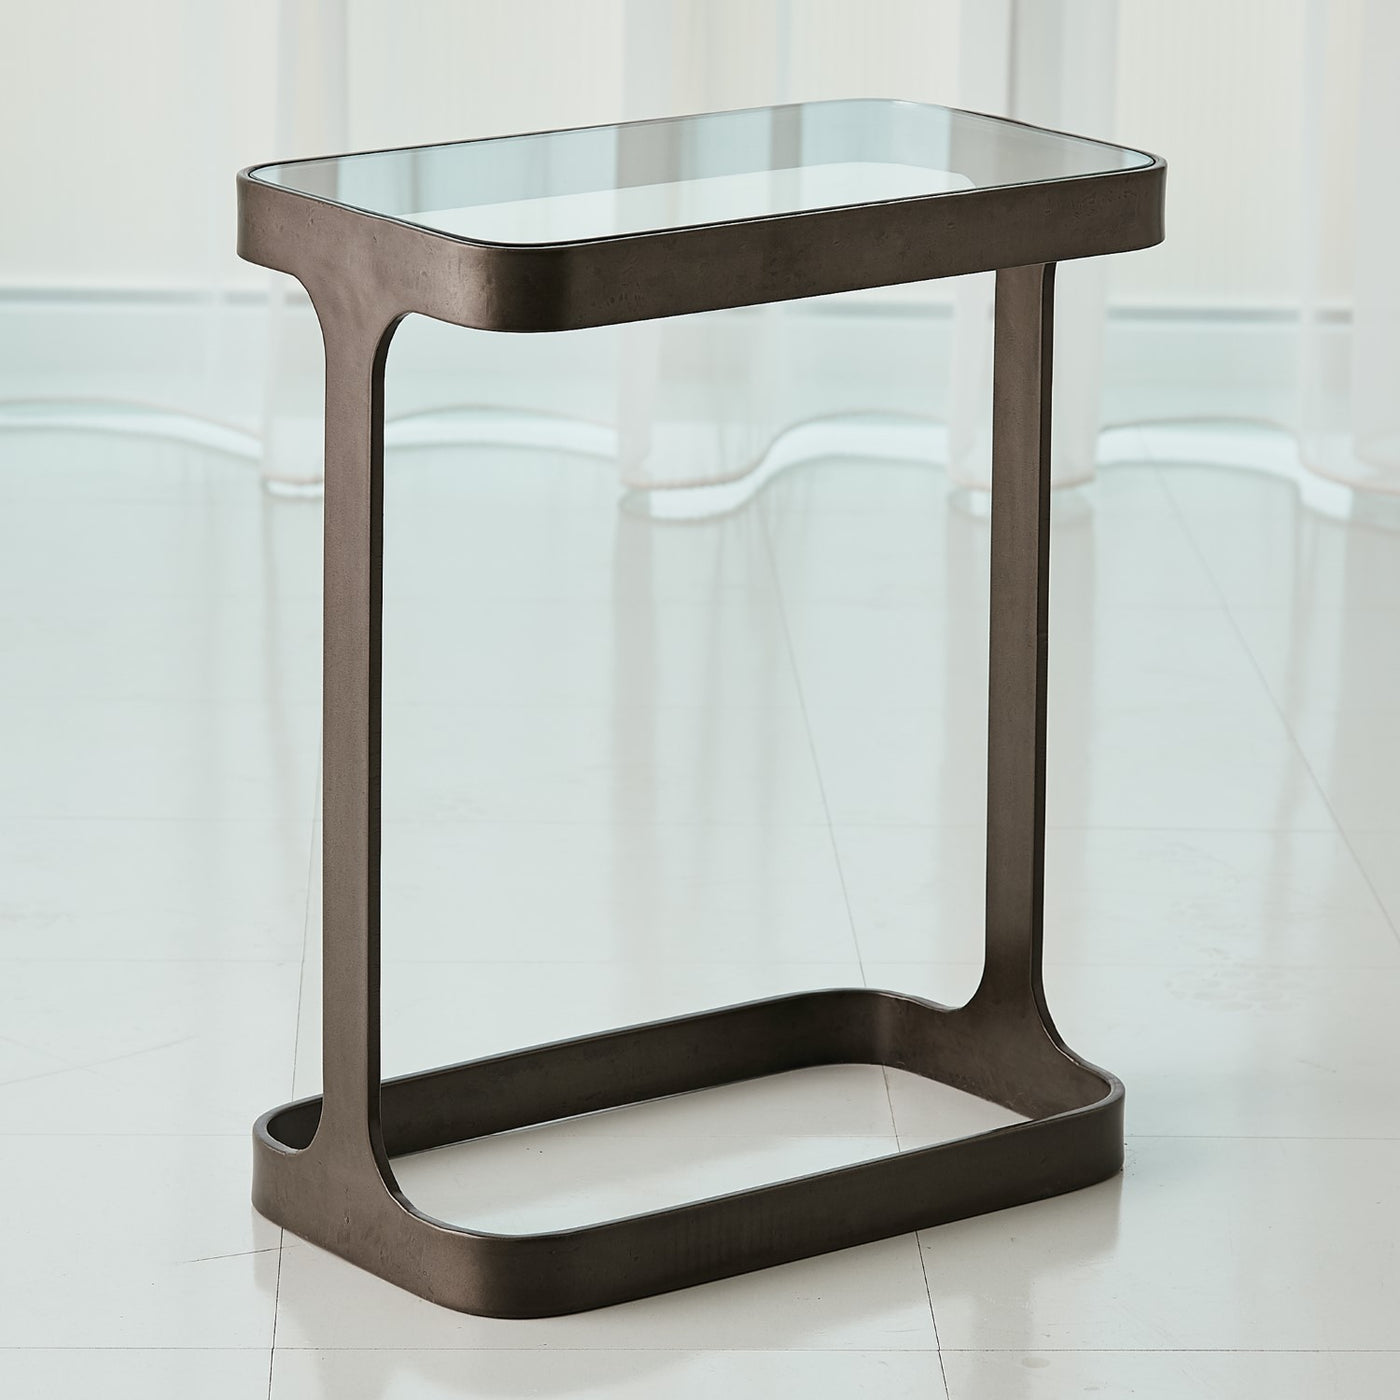 SADDLE TABLE-BRONZE by Global Views